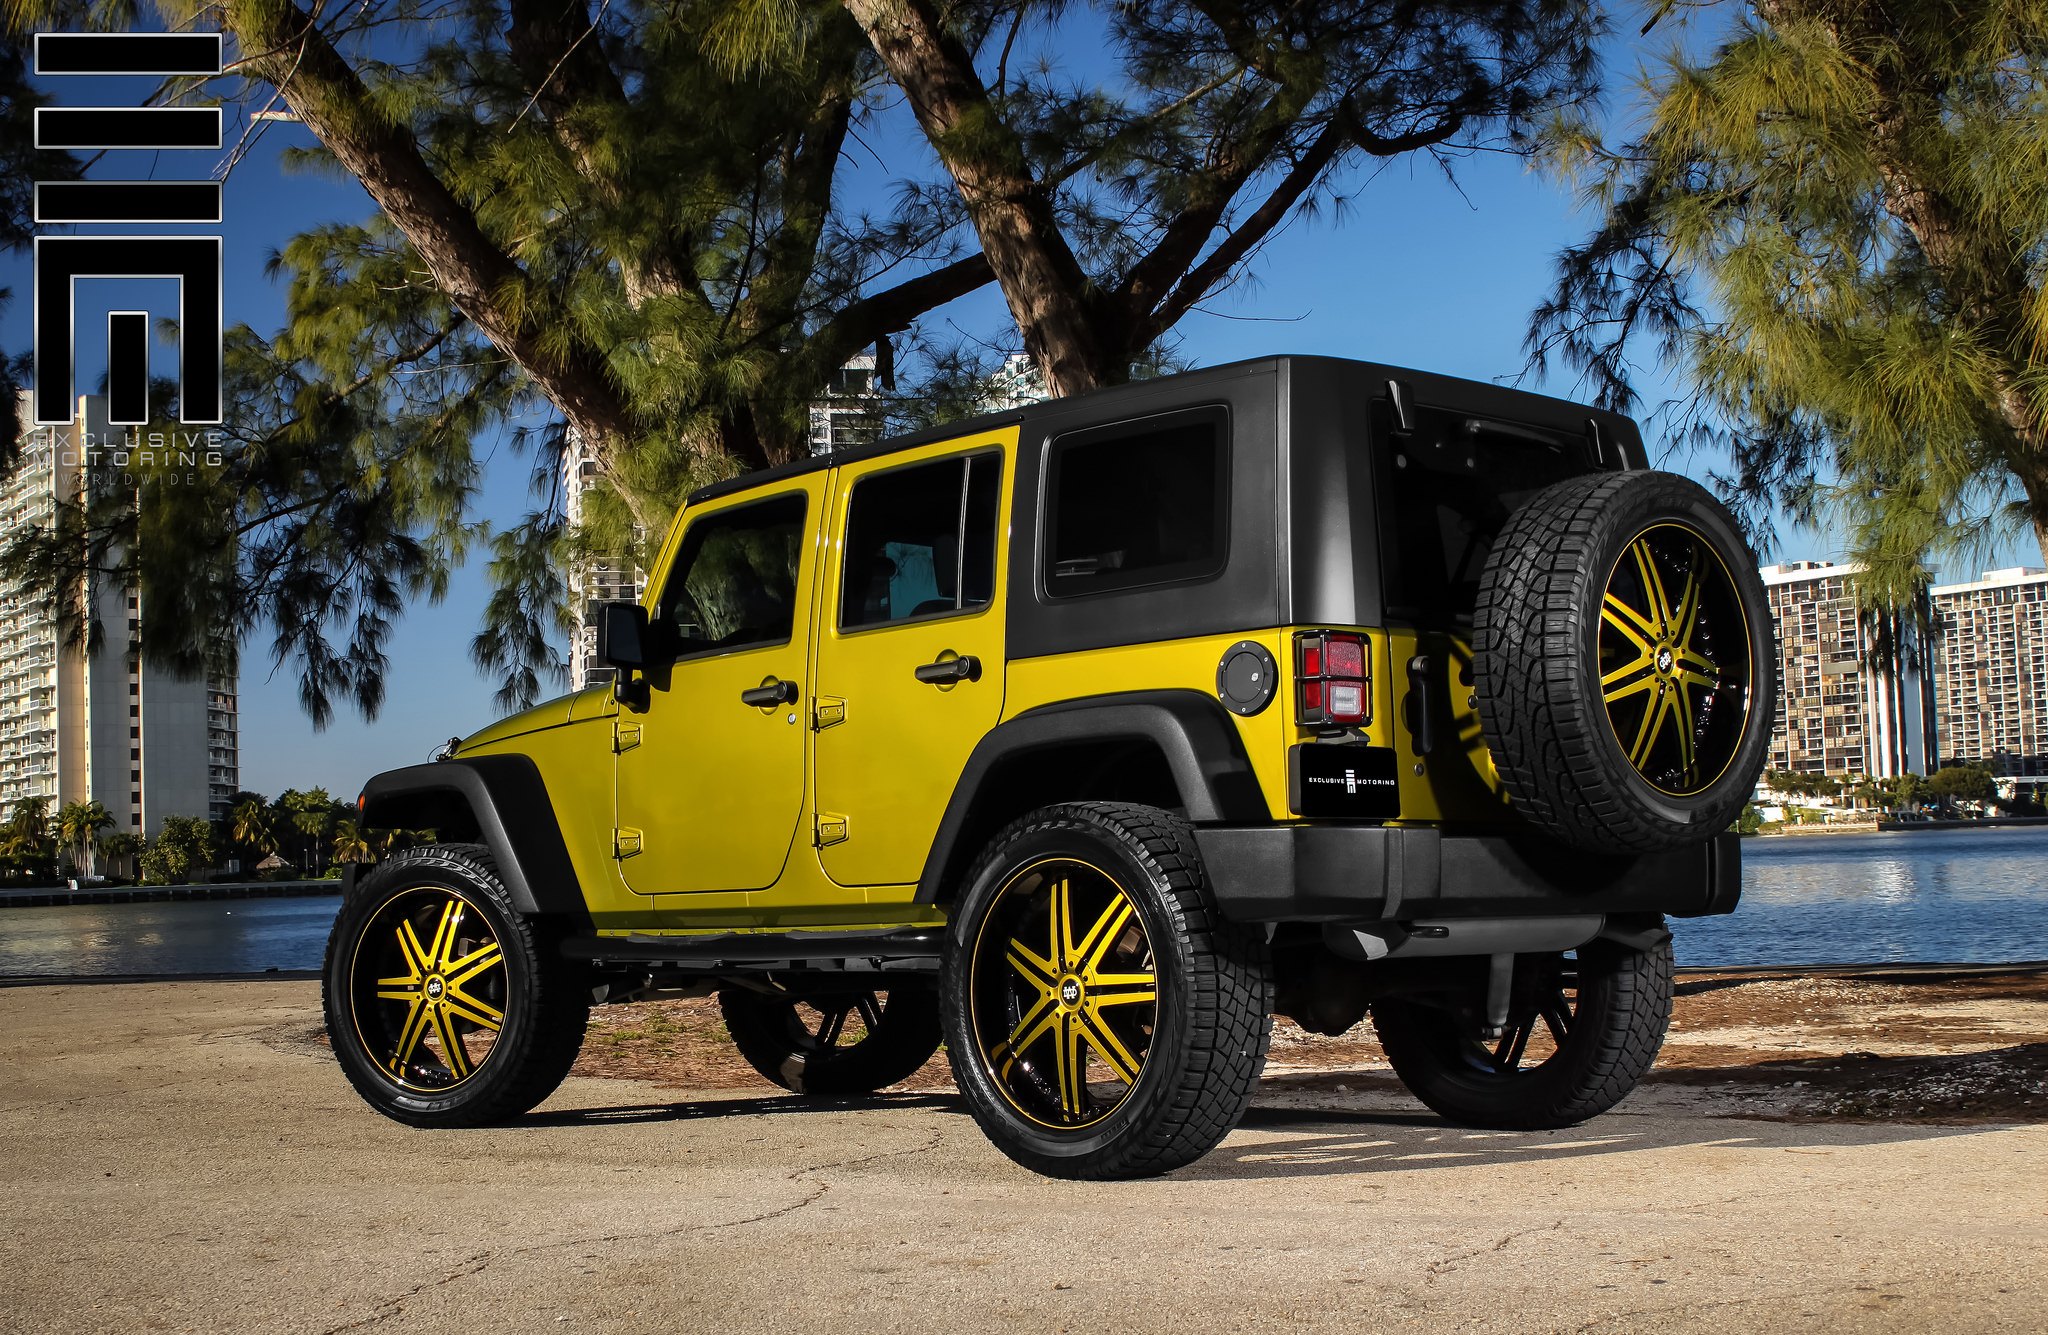 Jeep Wrangler Unlimited on Colormatched Rims by Exclusive Motoring —   Gallery